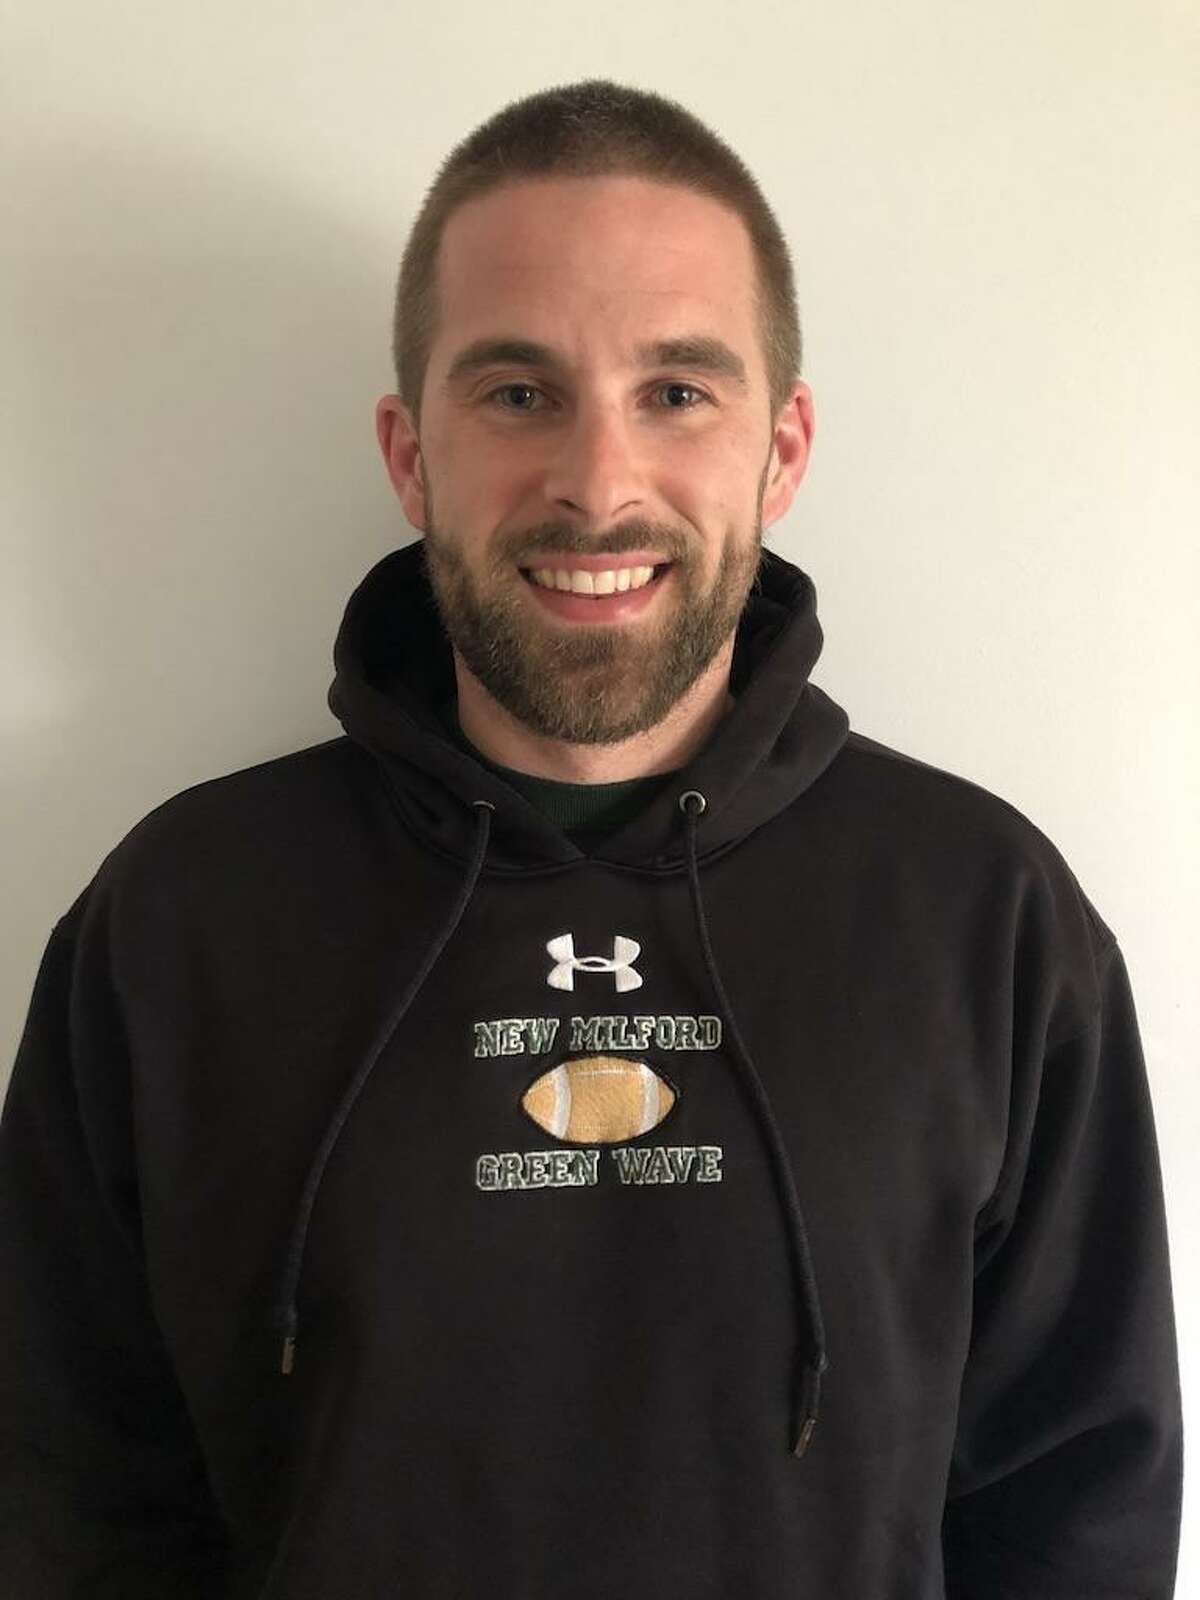 New Milford named 33-year-old Sean Murray as its newest head football coach.